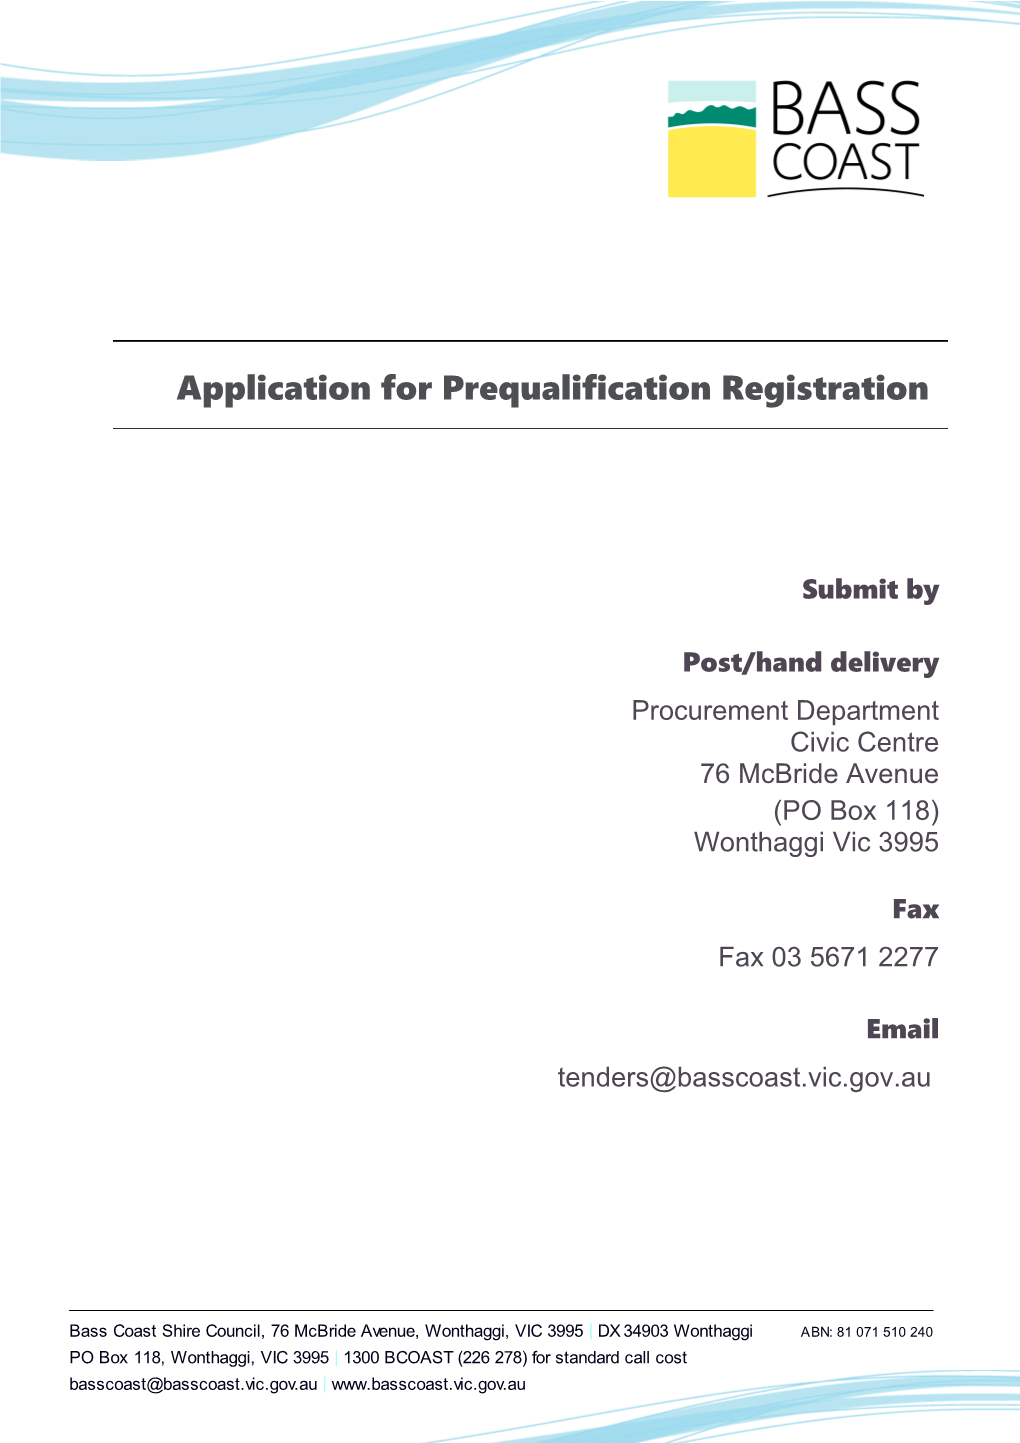 Section B - Application for Registration